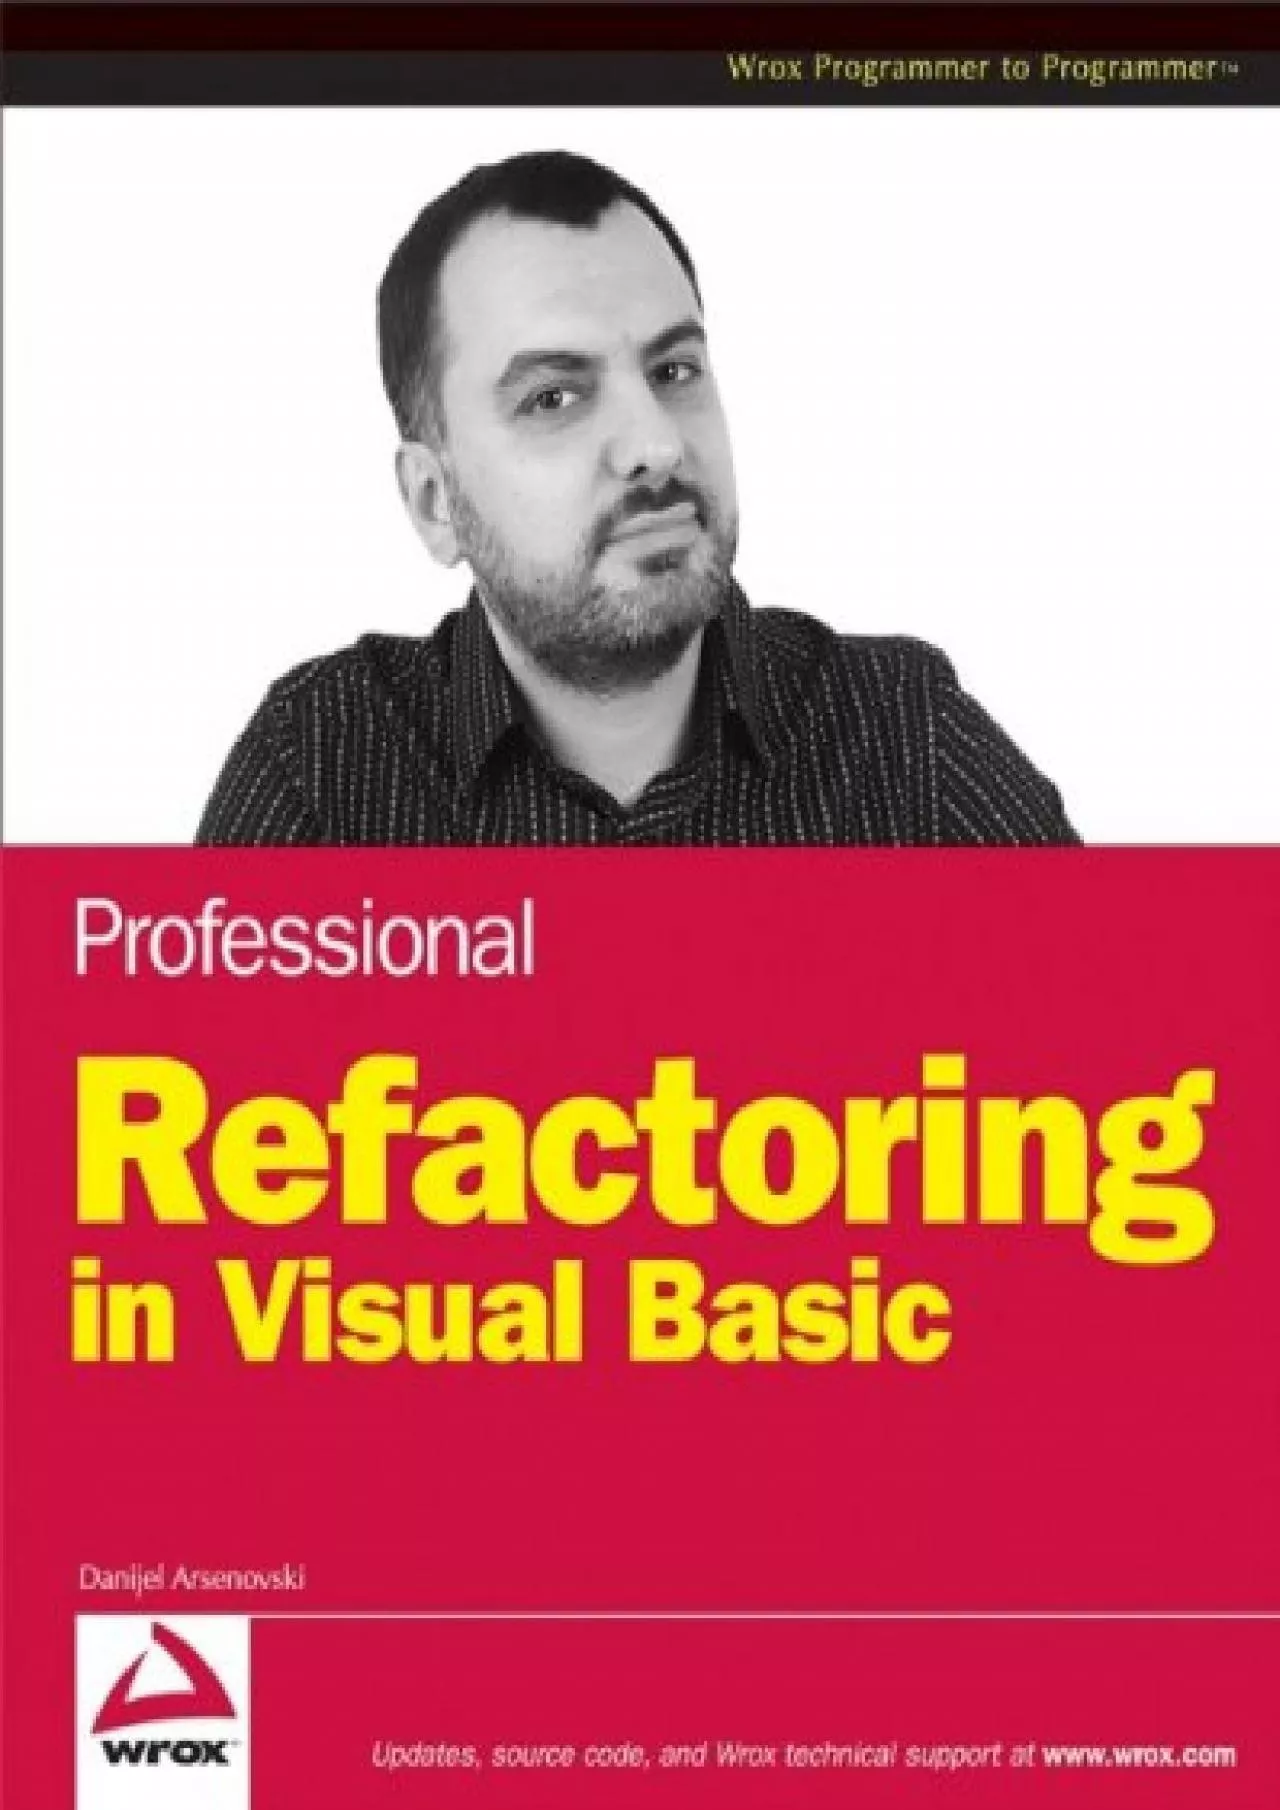 [DOWLOAD]-Professional Refactoring in Visual Basic (Programmer to Programmer)